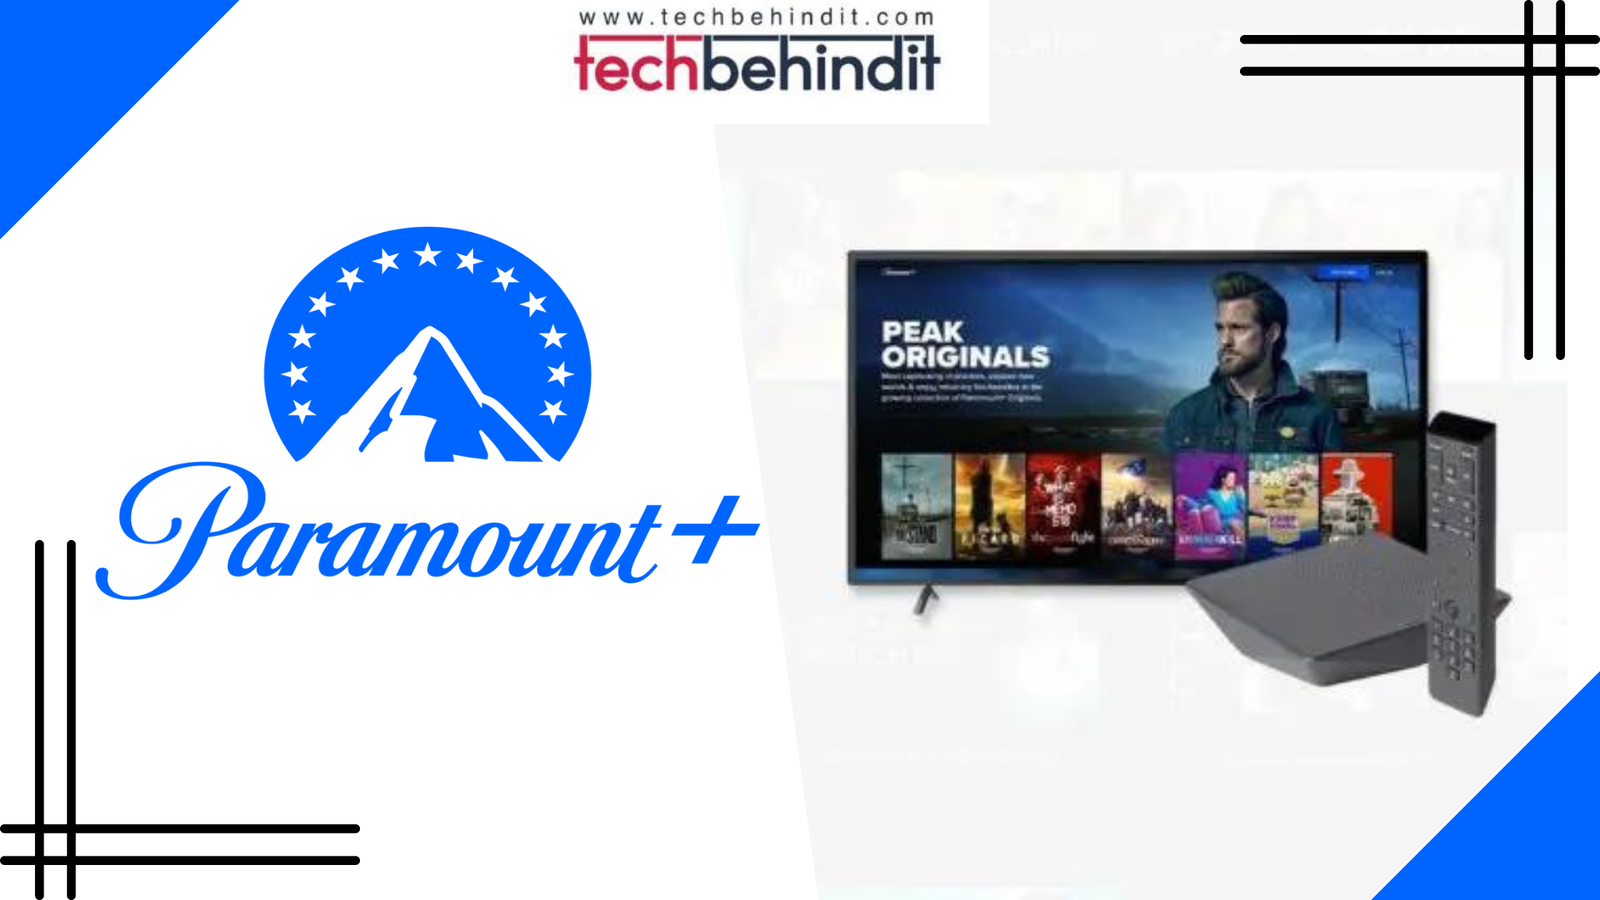 Paramount plus/xfinity: Overview and How To Use?